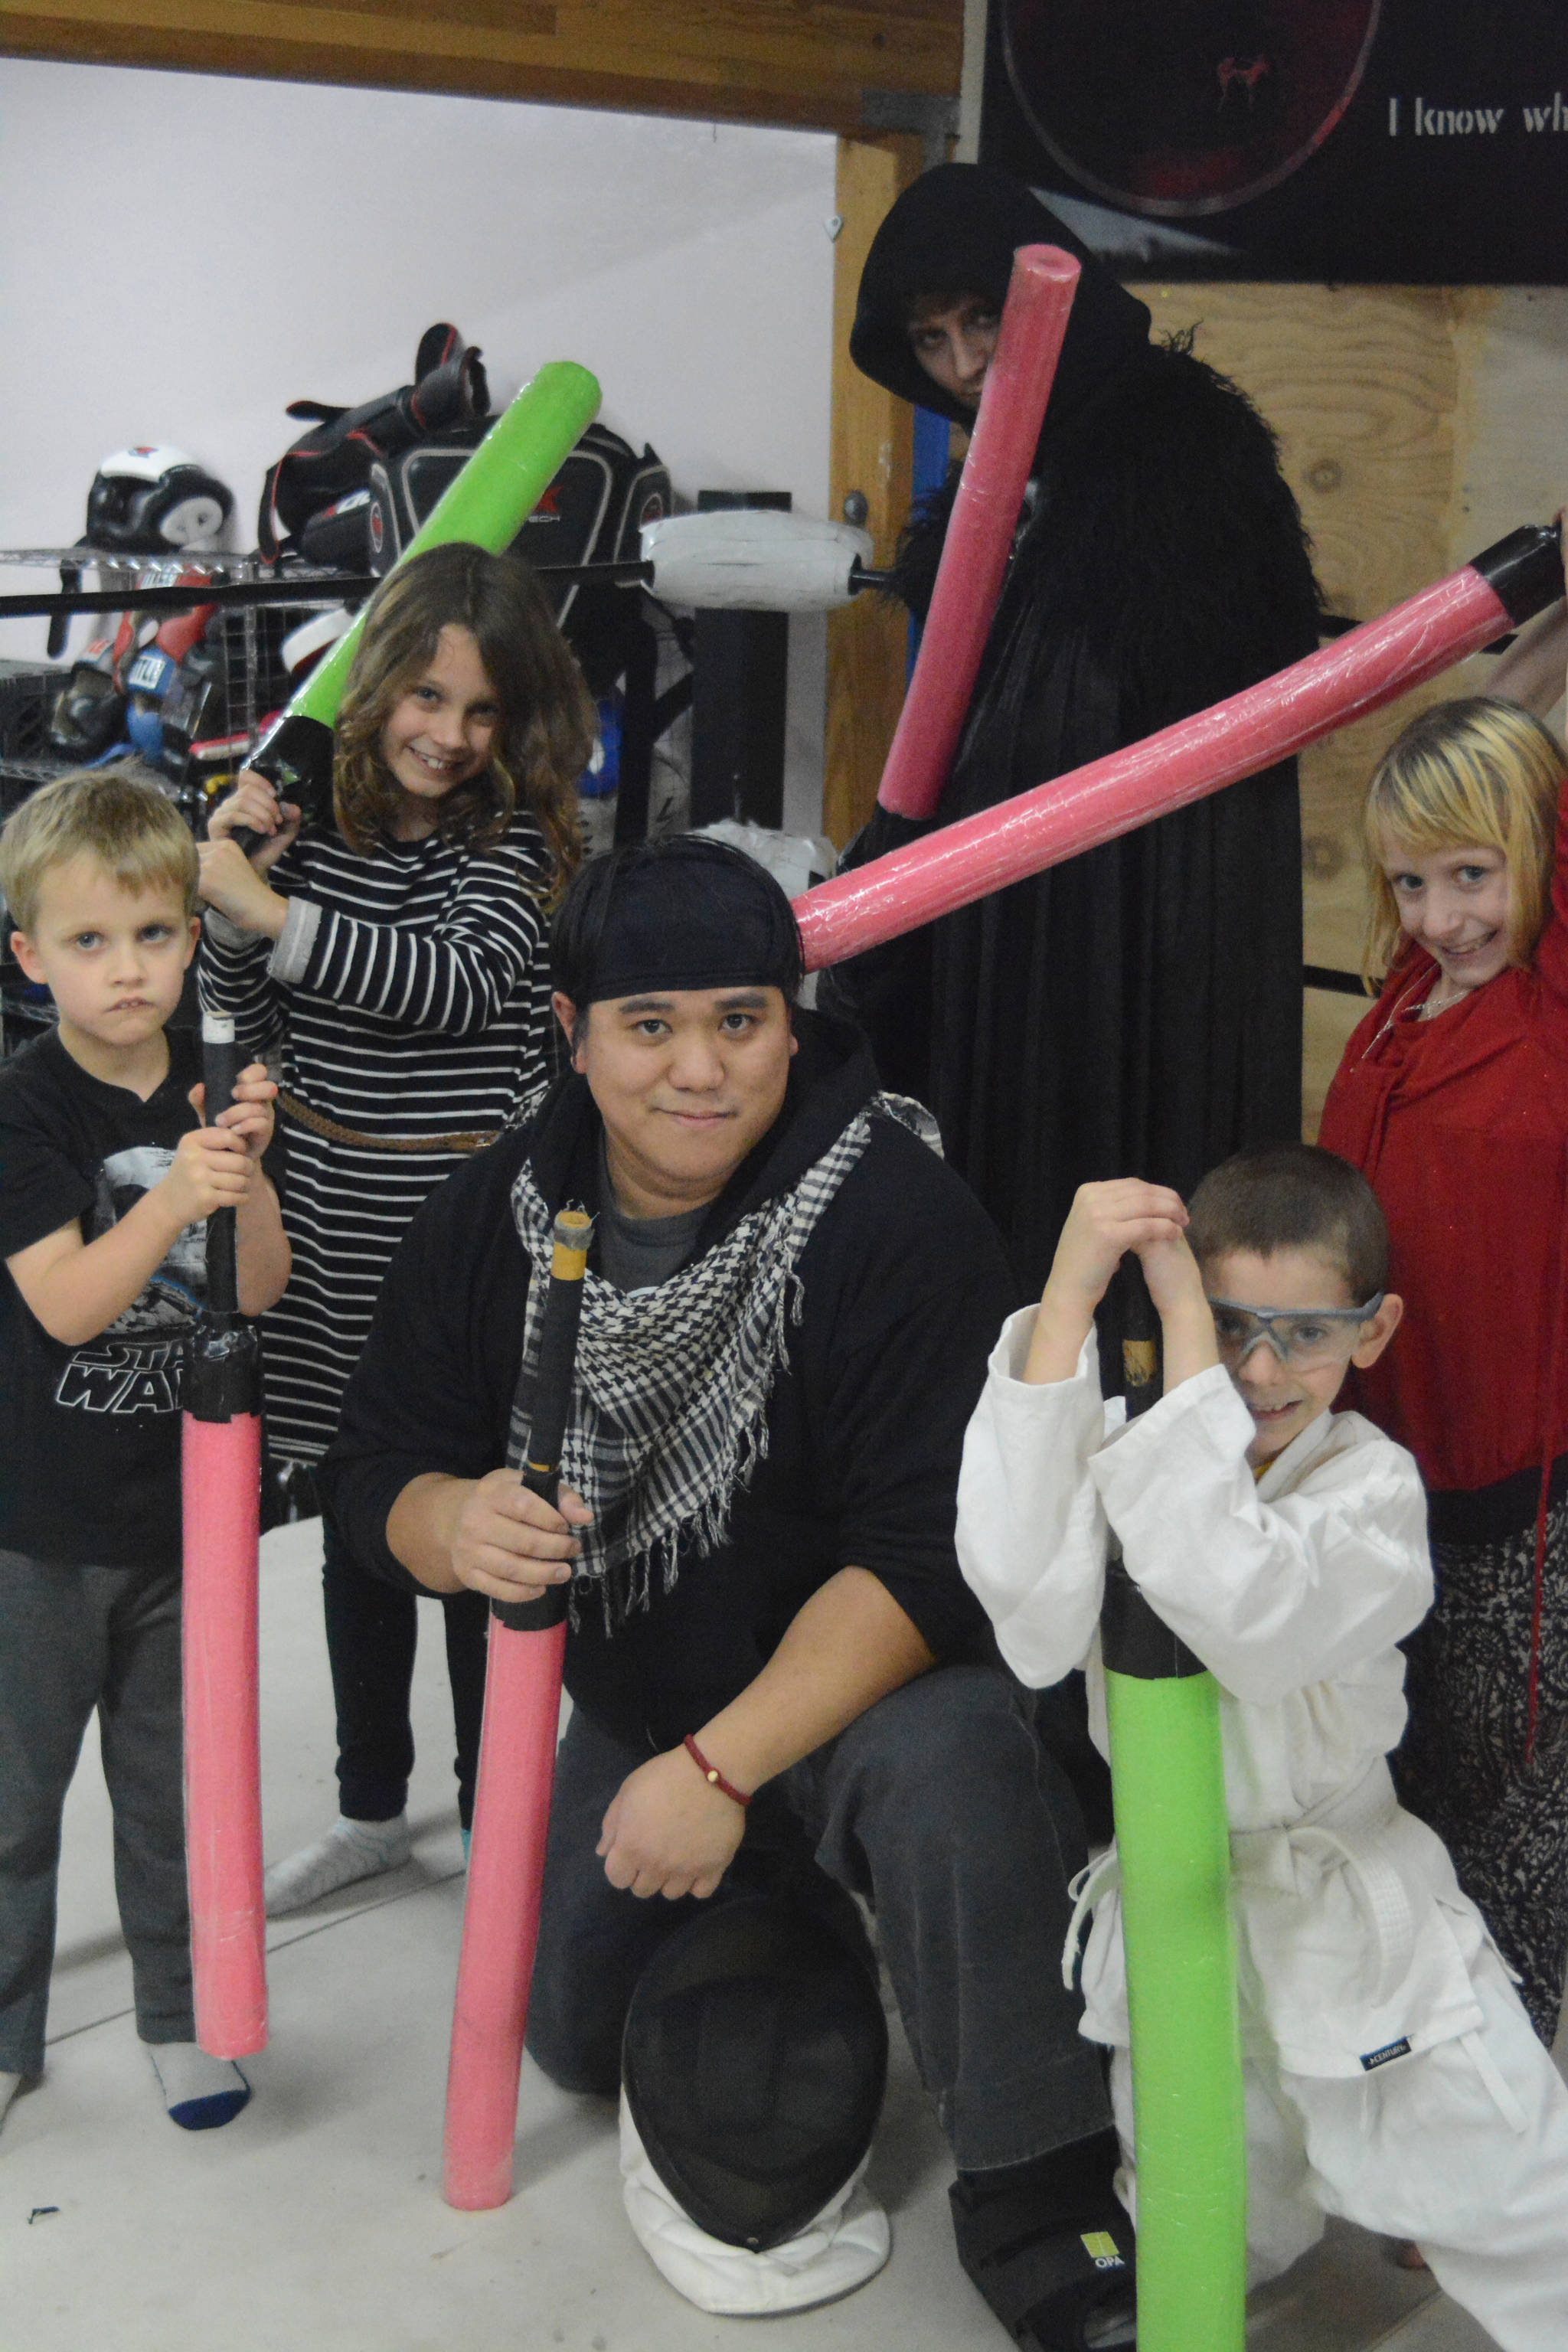 Students at K-Bay Martial Athletics get in the spirit of “Star Wars: The Last Jedi” on Dec. 19. They fought light saber battles with foam swords. From left to right, back, are Jim Richardson, Charlotte Richardson and Cooper Hyde; center, Guro Kurt P. Leffler II, Hayden Cox, second from right, and Alivia Craddock. K-Bay Martial Athletics offers an after-school program called Warriors and Scholars that teaches children martial arts but also values like politeness, respects and team work as well as weapons safety.